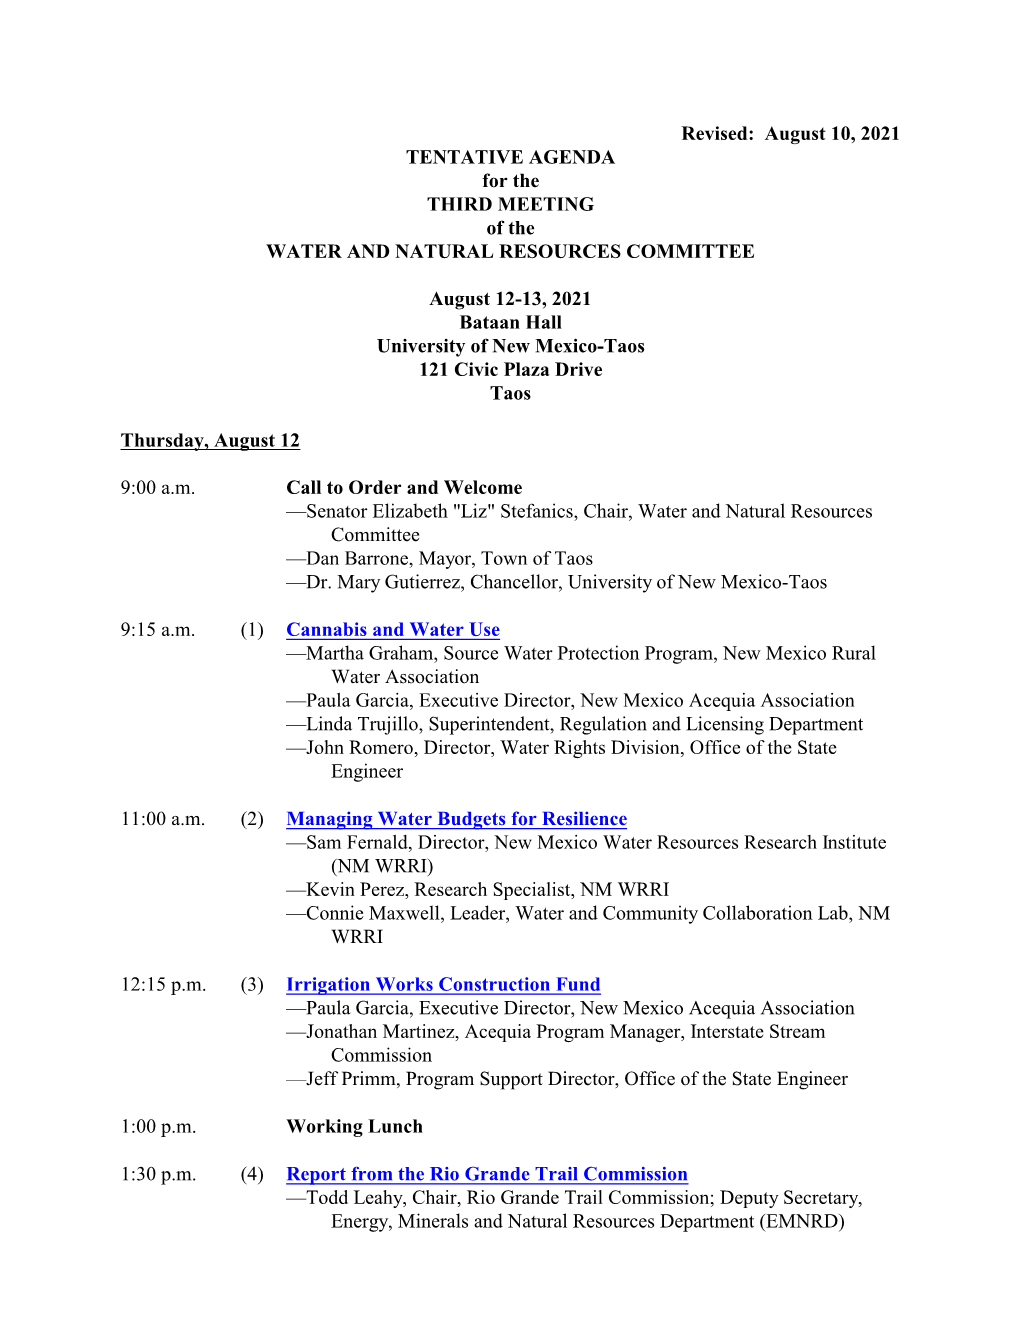 August 10, 2021 TENTATIVE AGENDA for the THIRD MEETING of the WATER and NATURAL RESOURCES COMMITTEE August 12-13, 2021